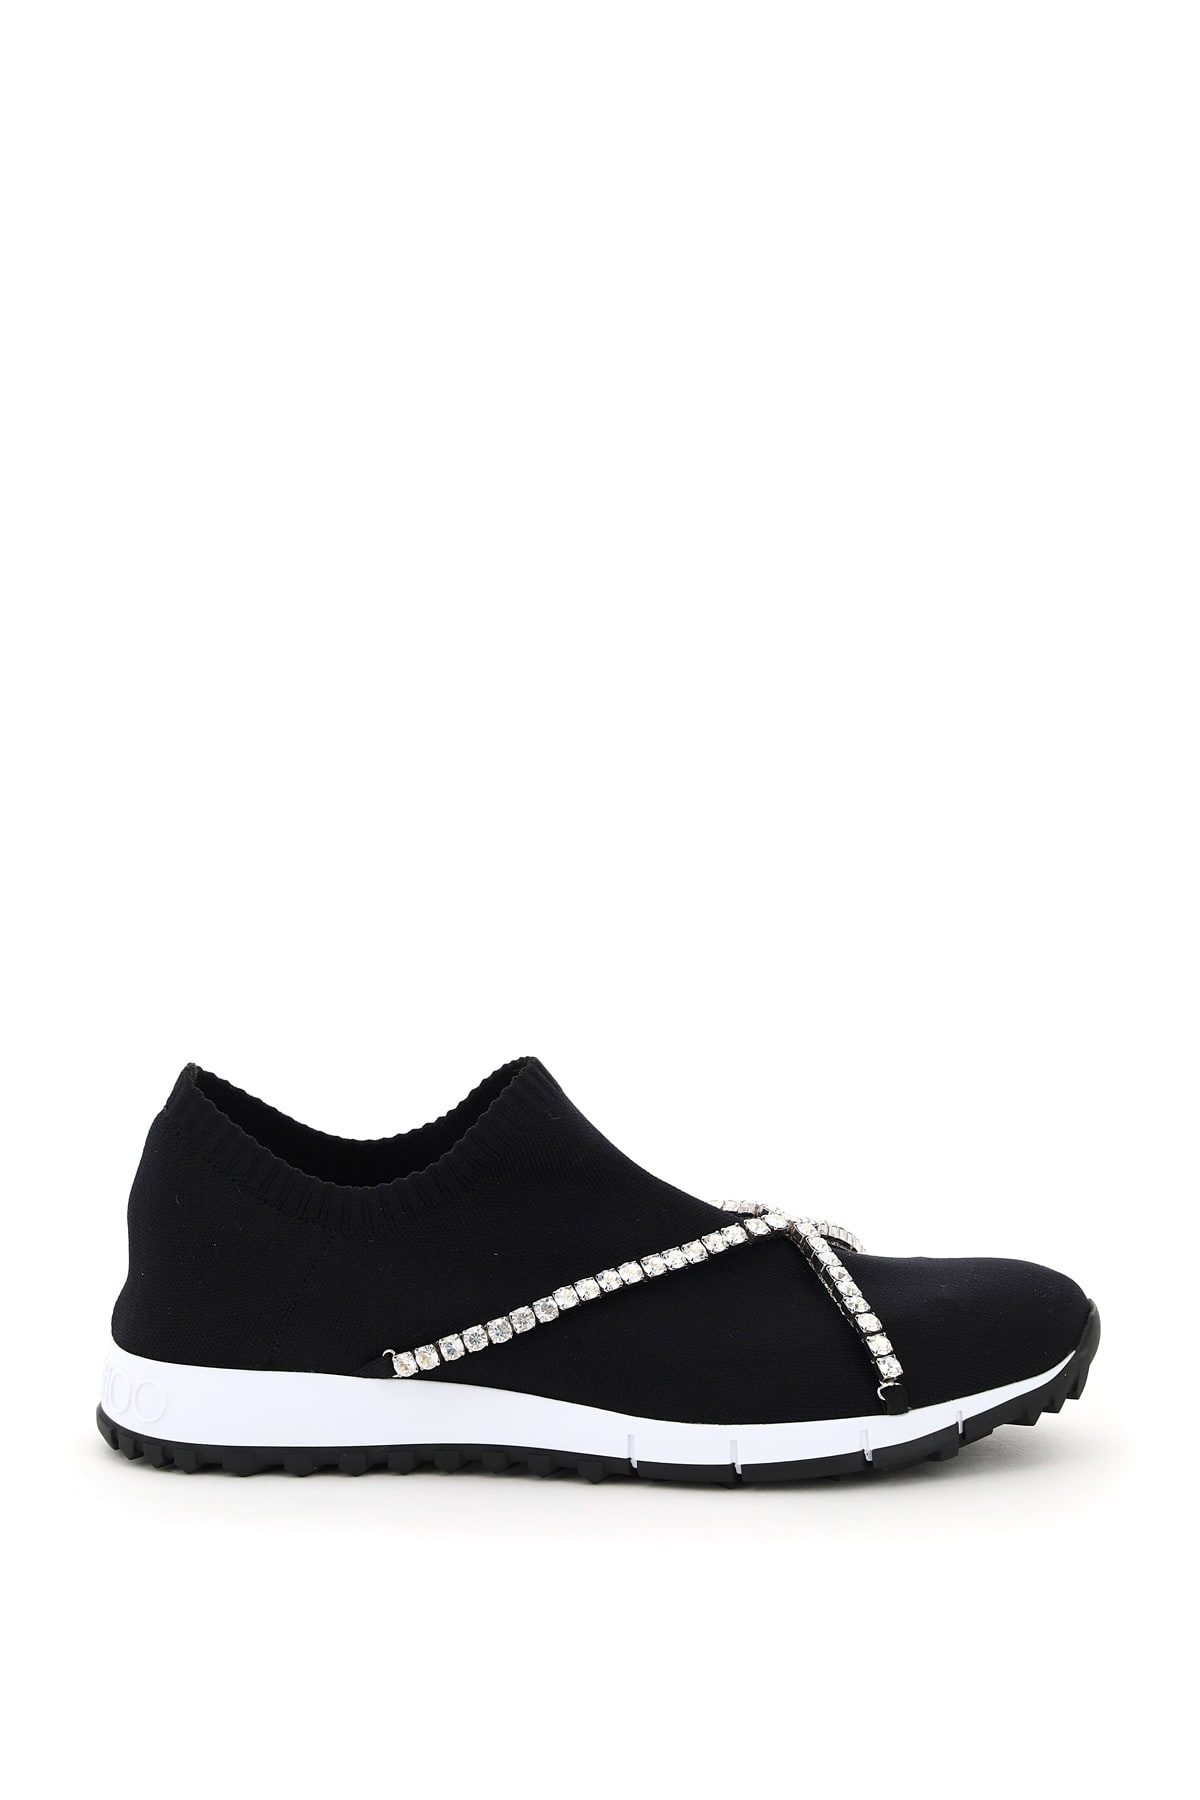 Buy Jimmy Choo Verona Sneakers Crystal Chain online, shop Jimmy Choo shoes with free shipping